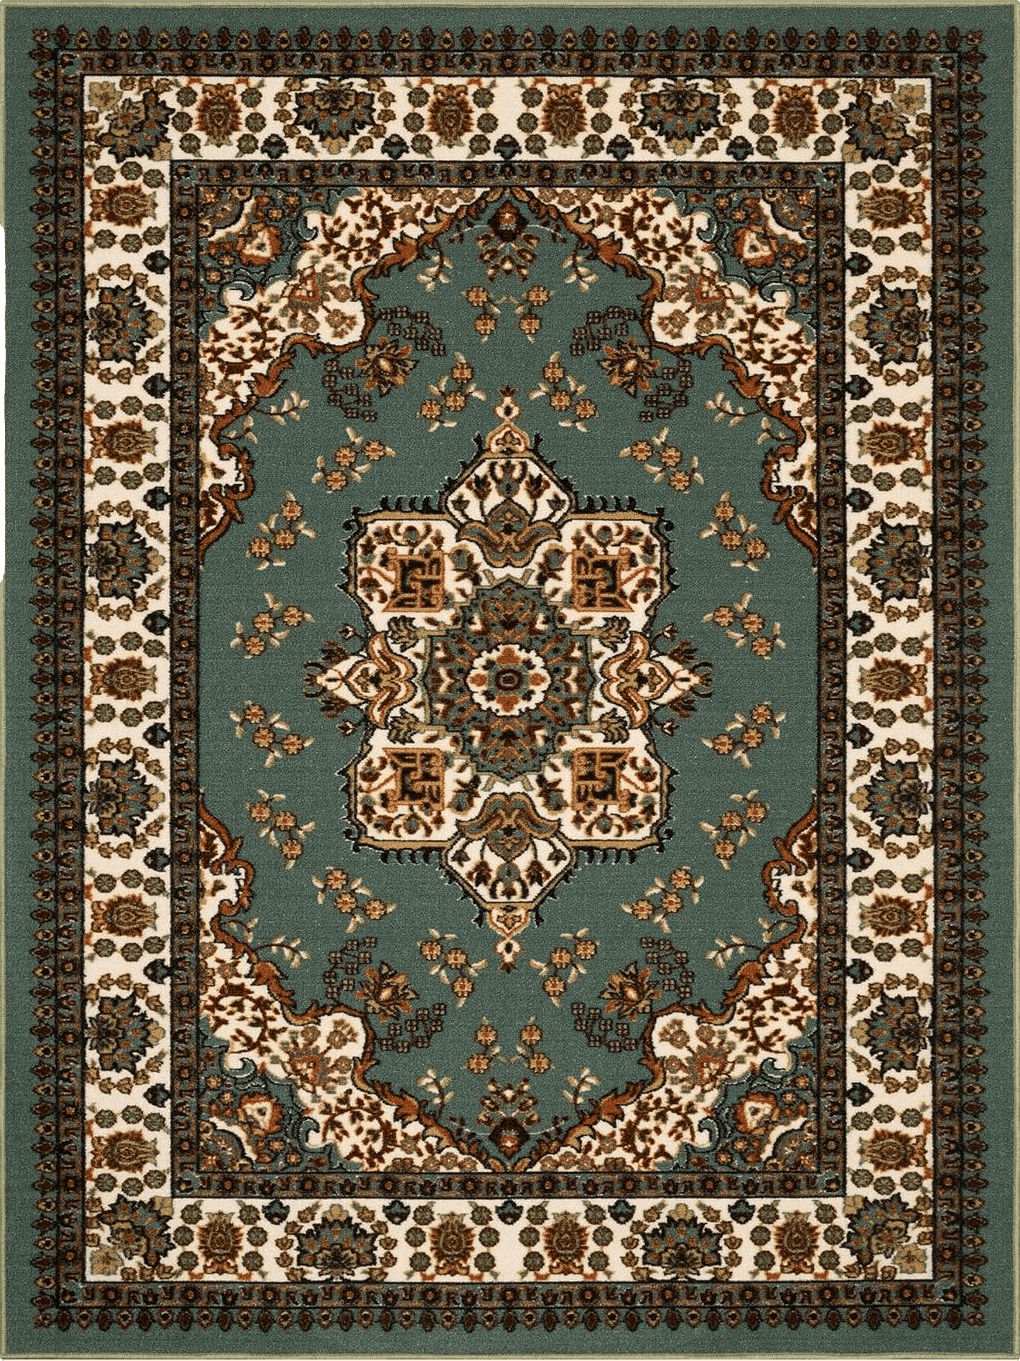 Oriental Antep Rugs Alfombras Oriental Traditional 5x7 Non-Skid (Non-Slip) Low Profile Pile Rubber Backing Indoor Area Rugs (Green, 5' x 7')